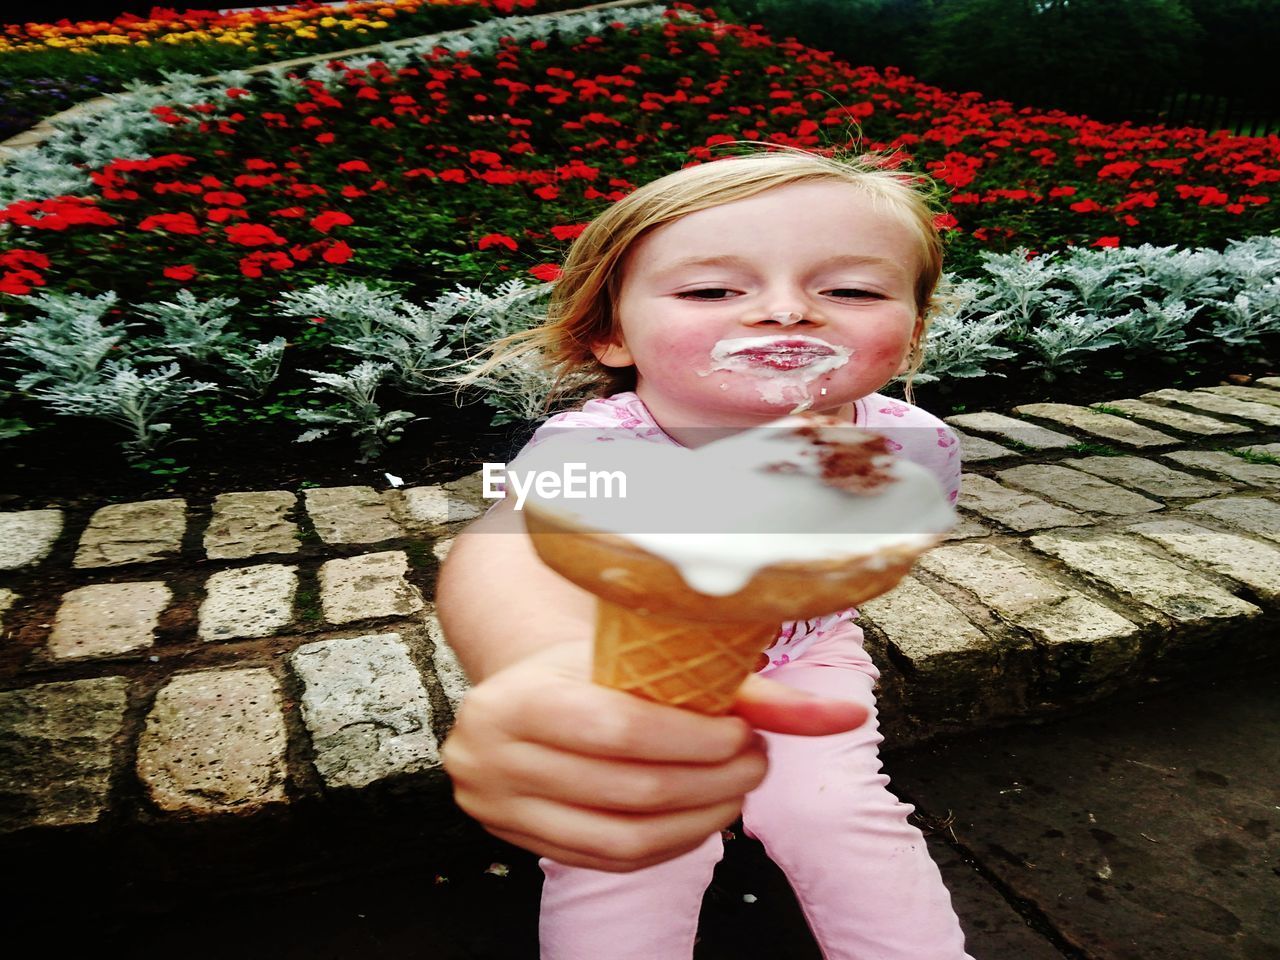 CLOSE-UP OF CUTE GIRL HOLDING ICE CREAM CONE